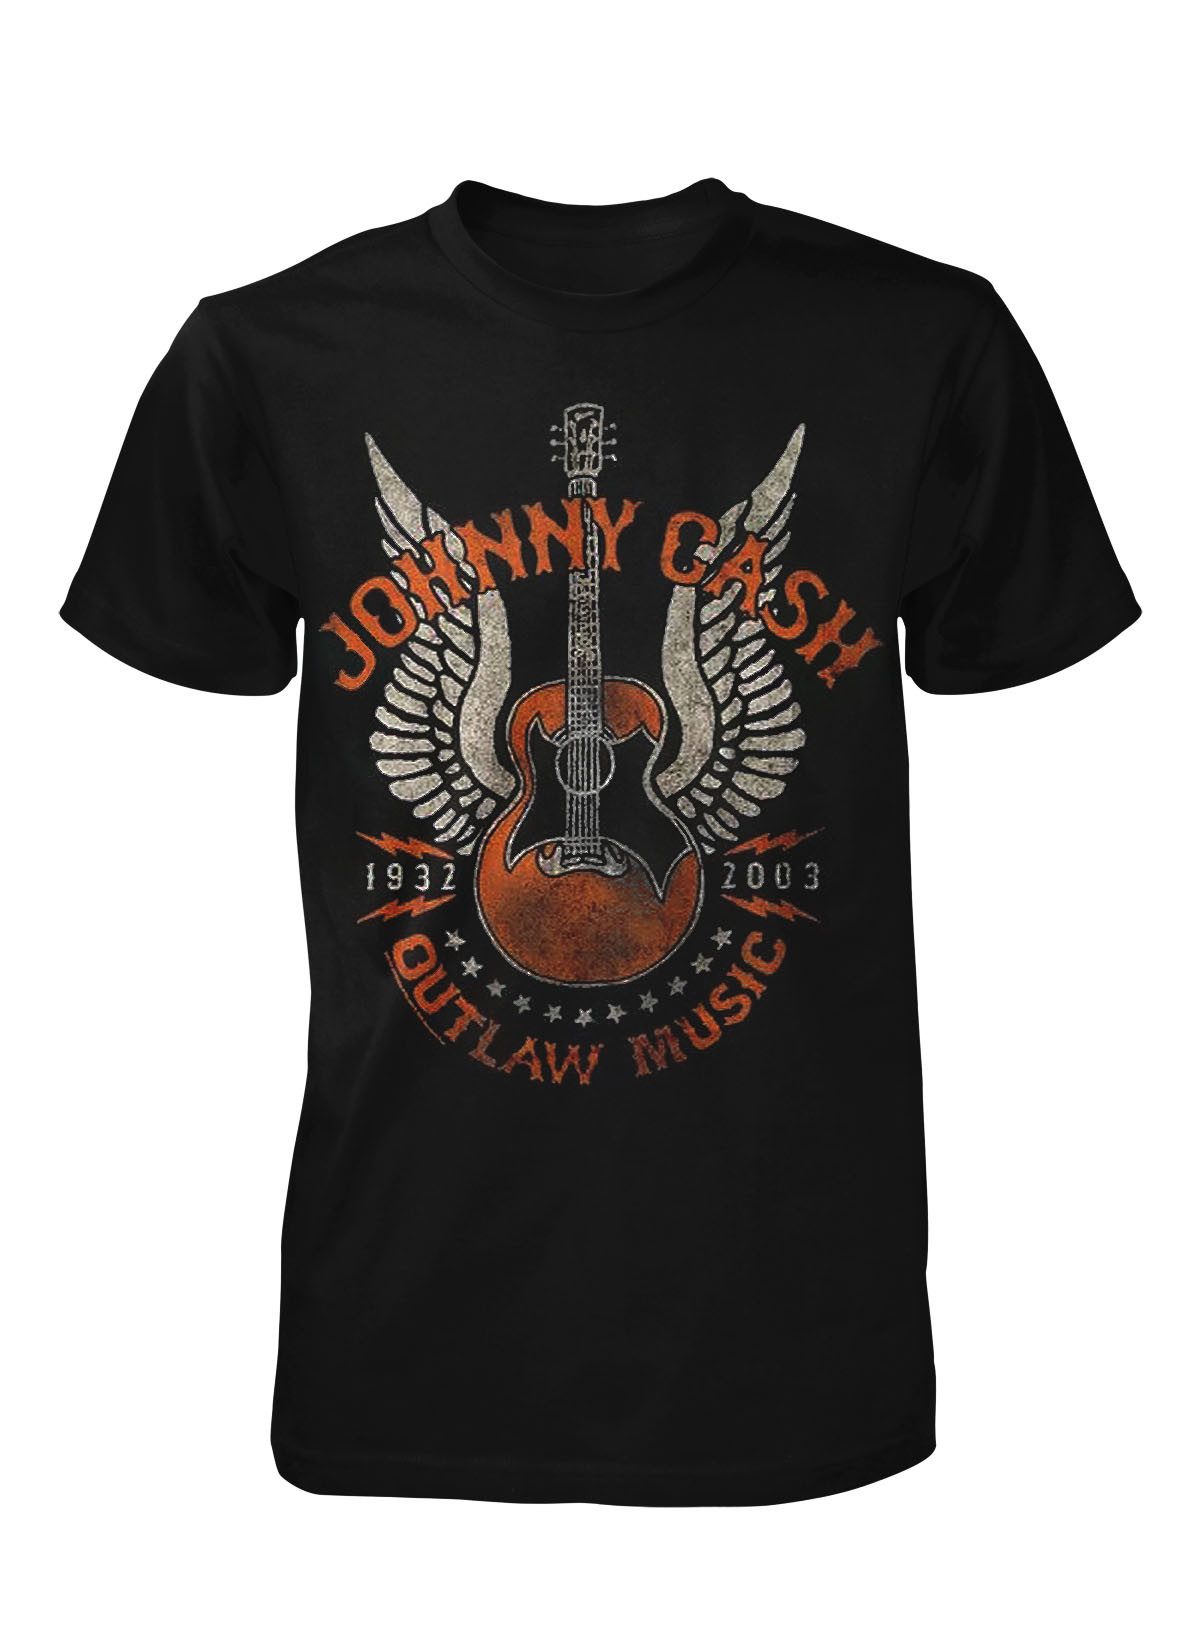 Johnny Cash T-Shirt Outlaw Music